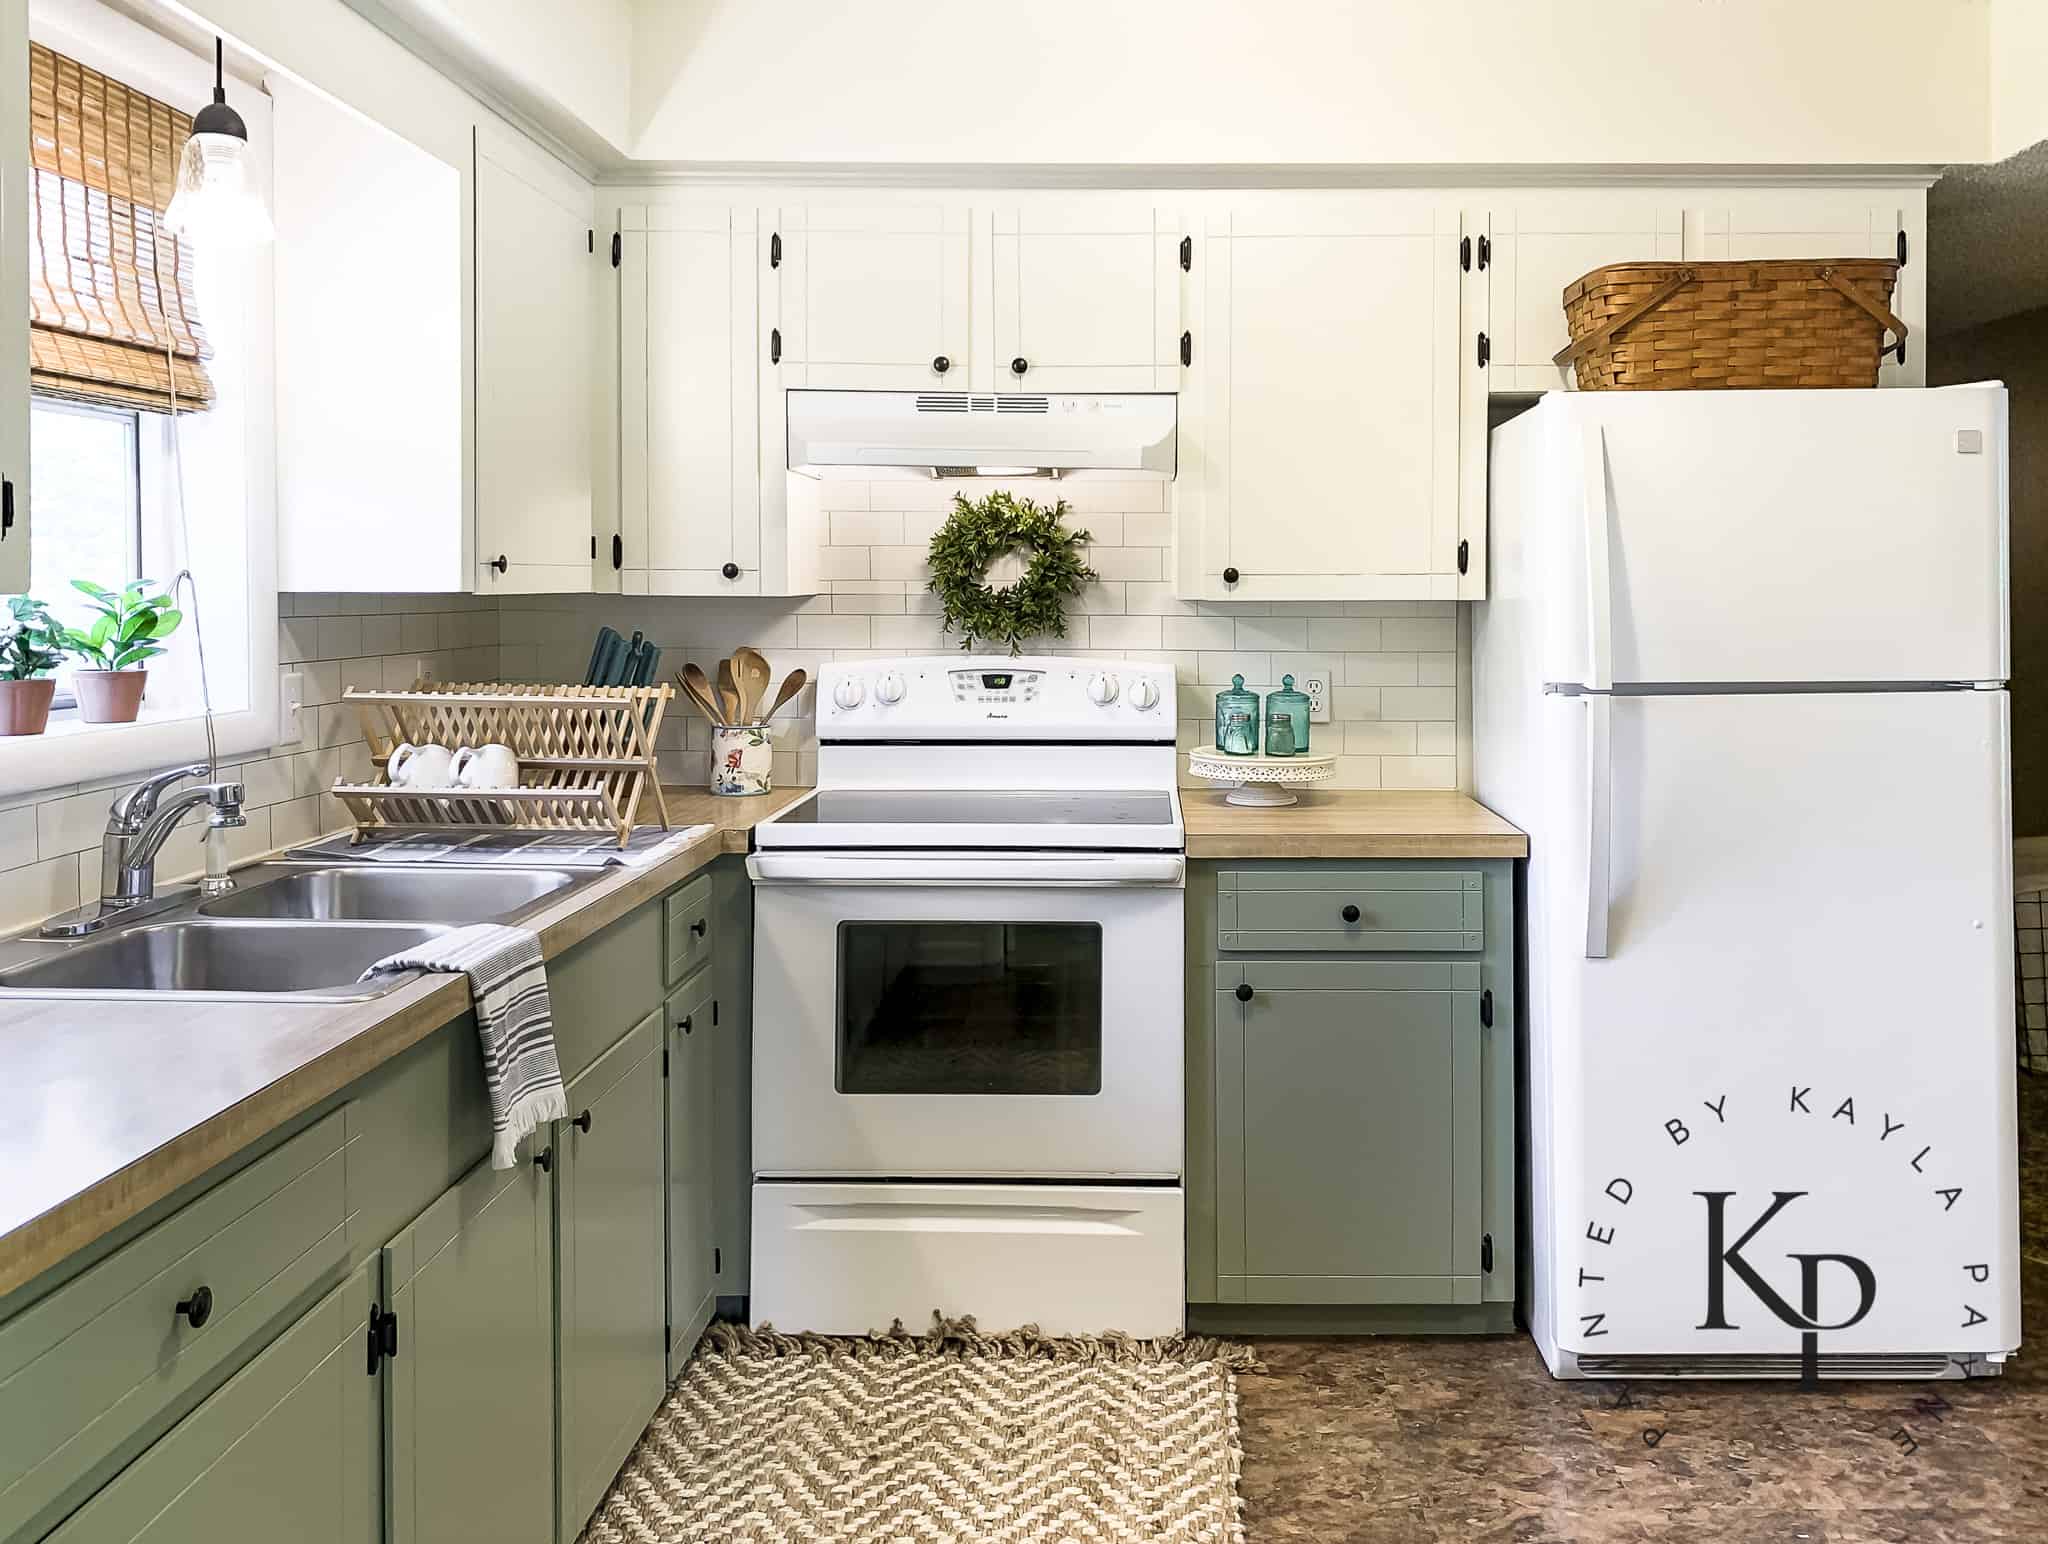 How To Repaint Kitchen Cabinets - Painted by Kayla Payne